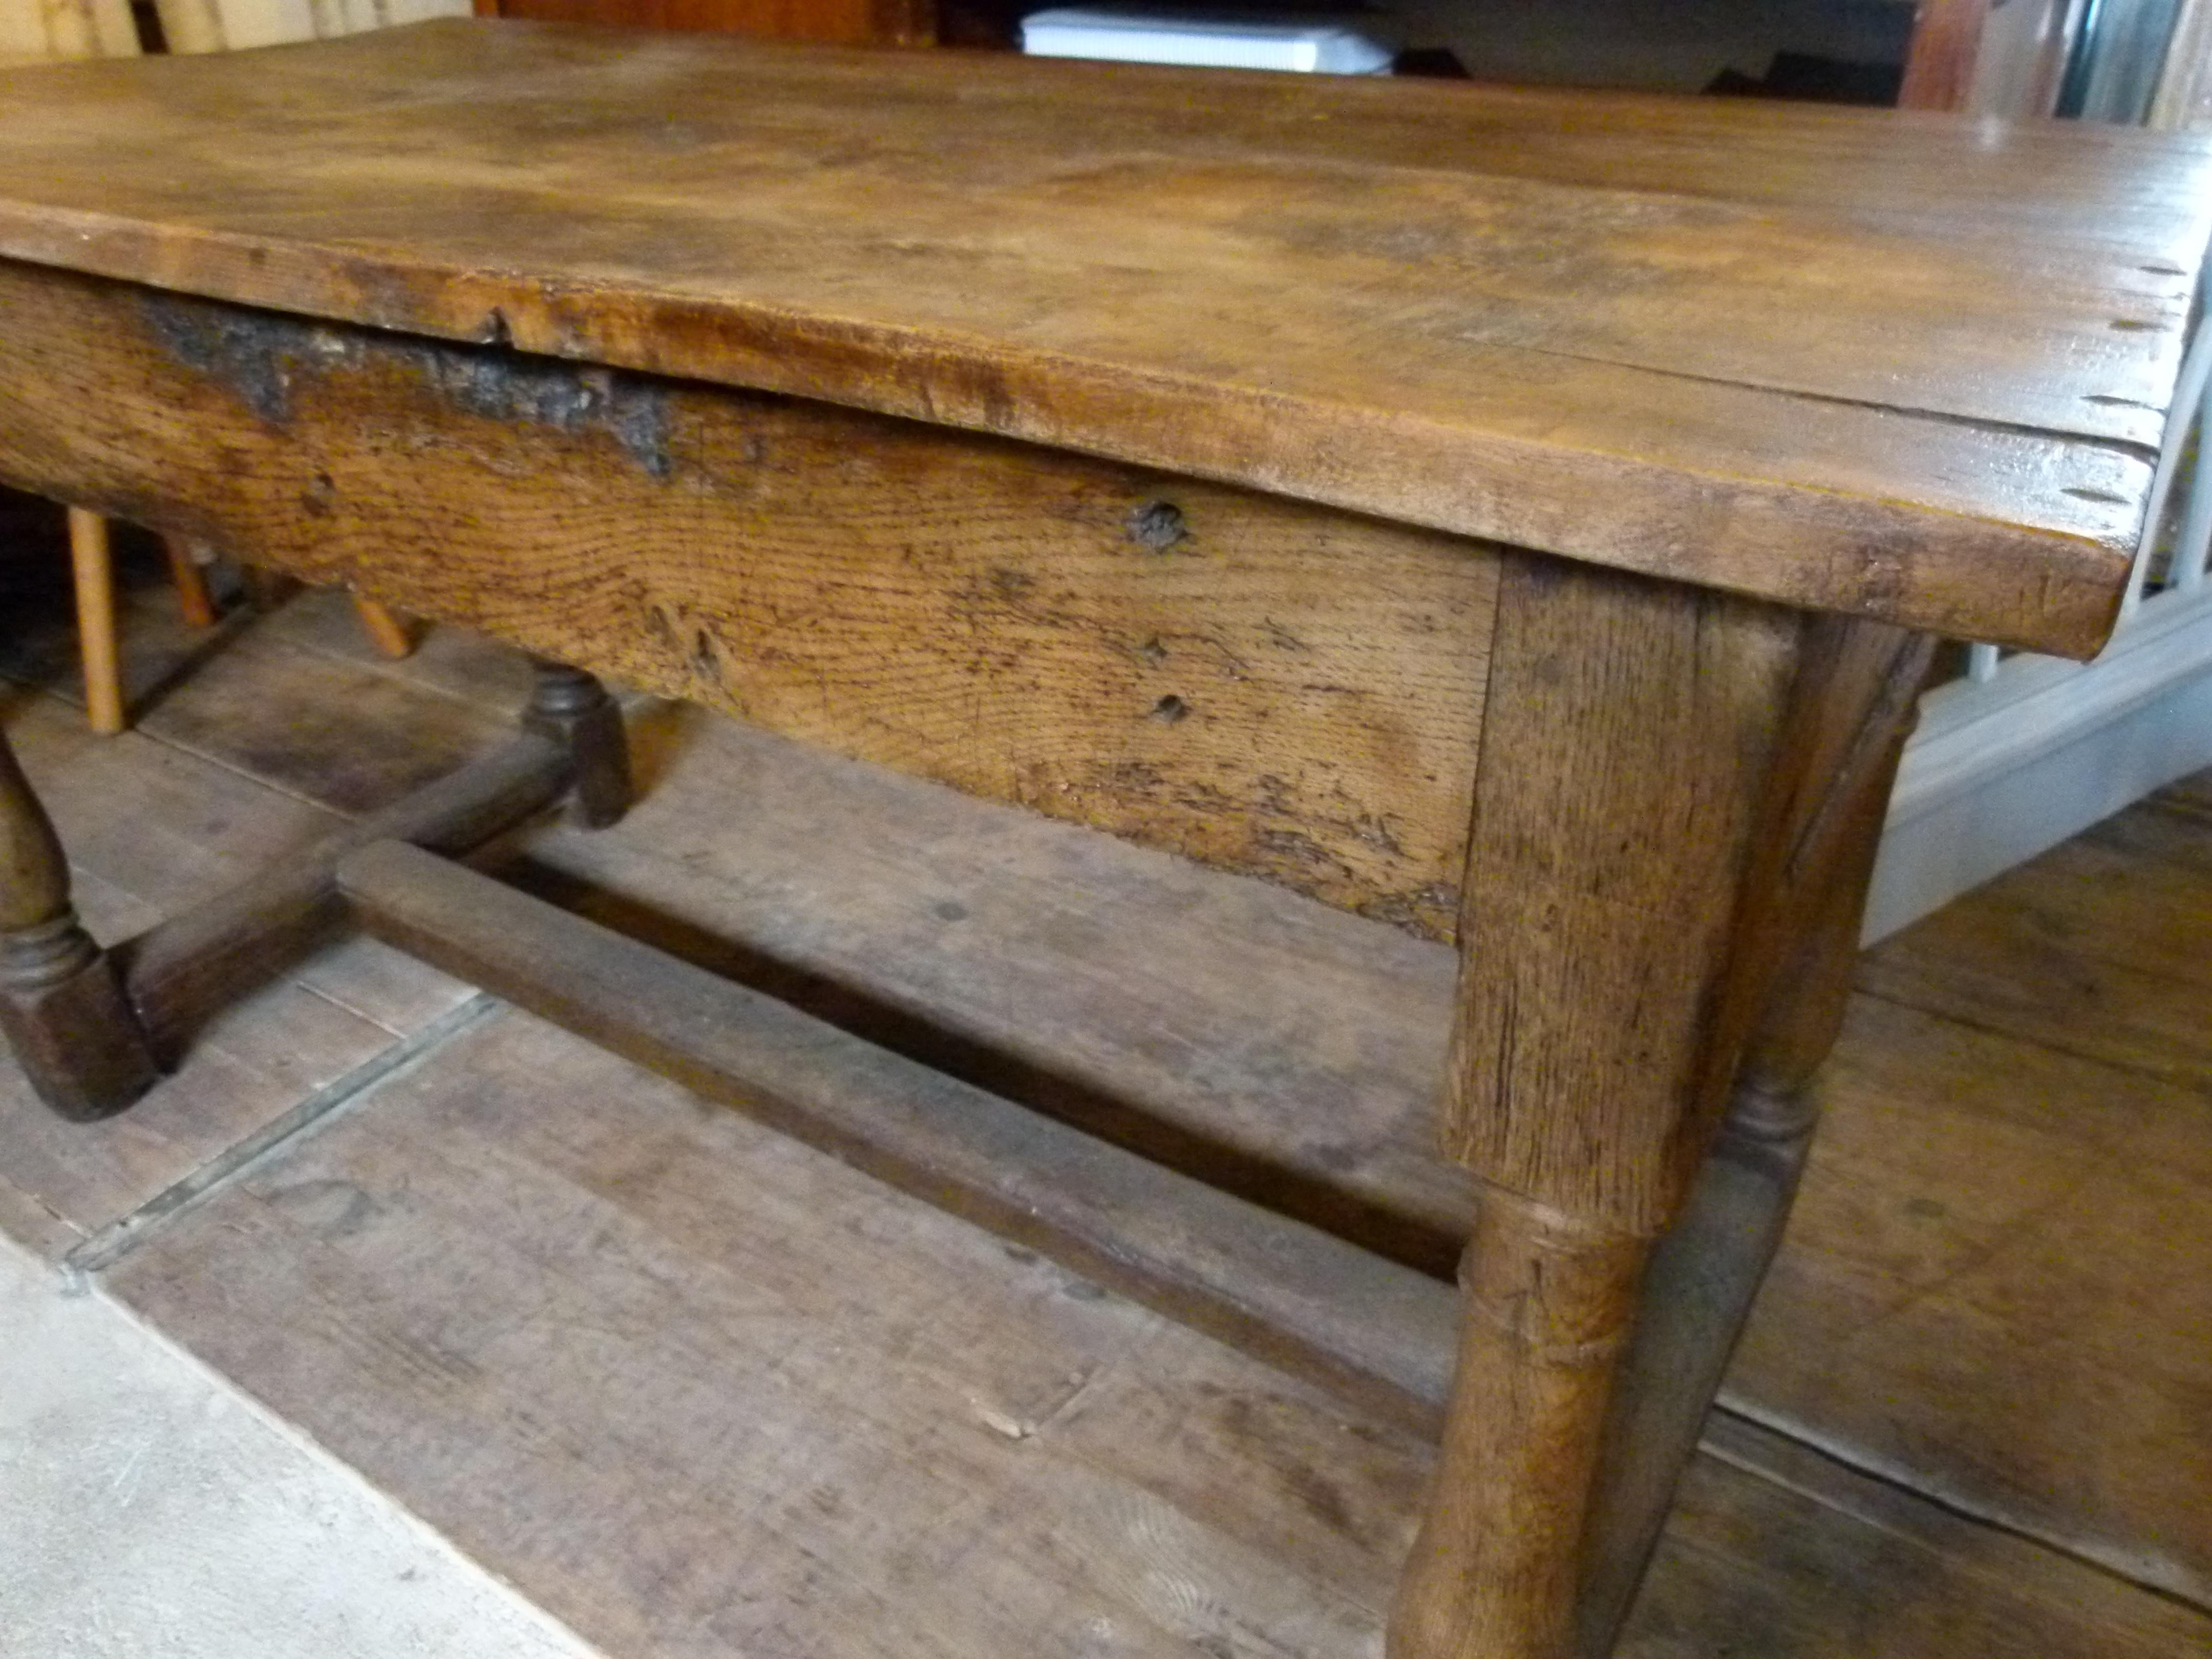 18th Century Wooden Table, Spain In Distressed Condition In Vulpellac, Girona